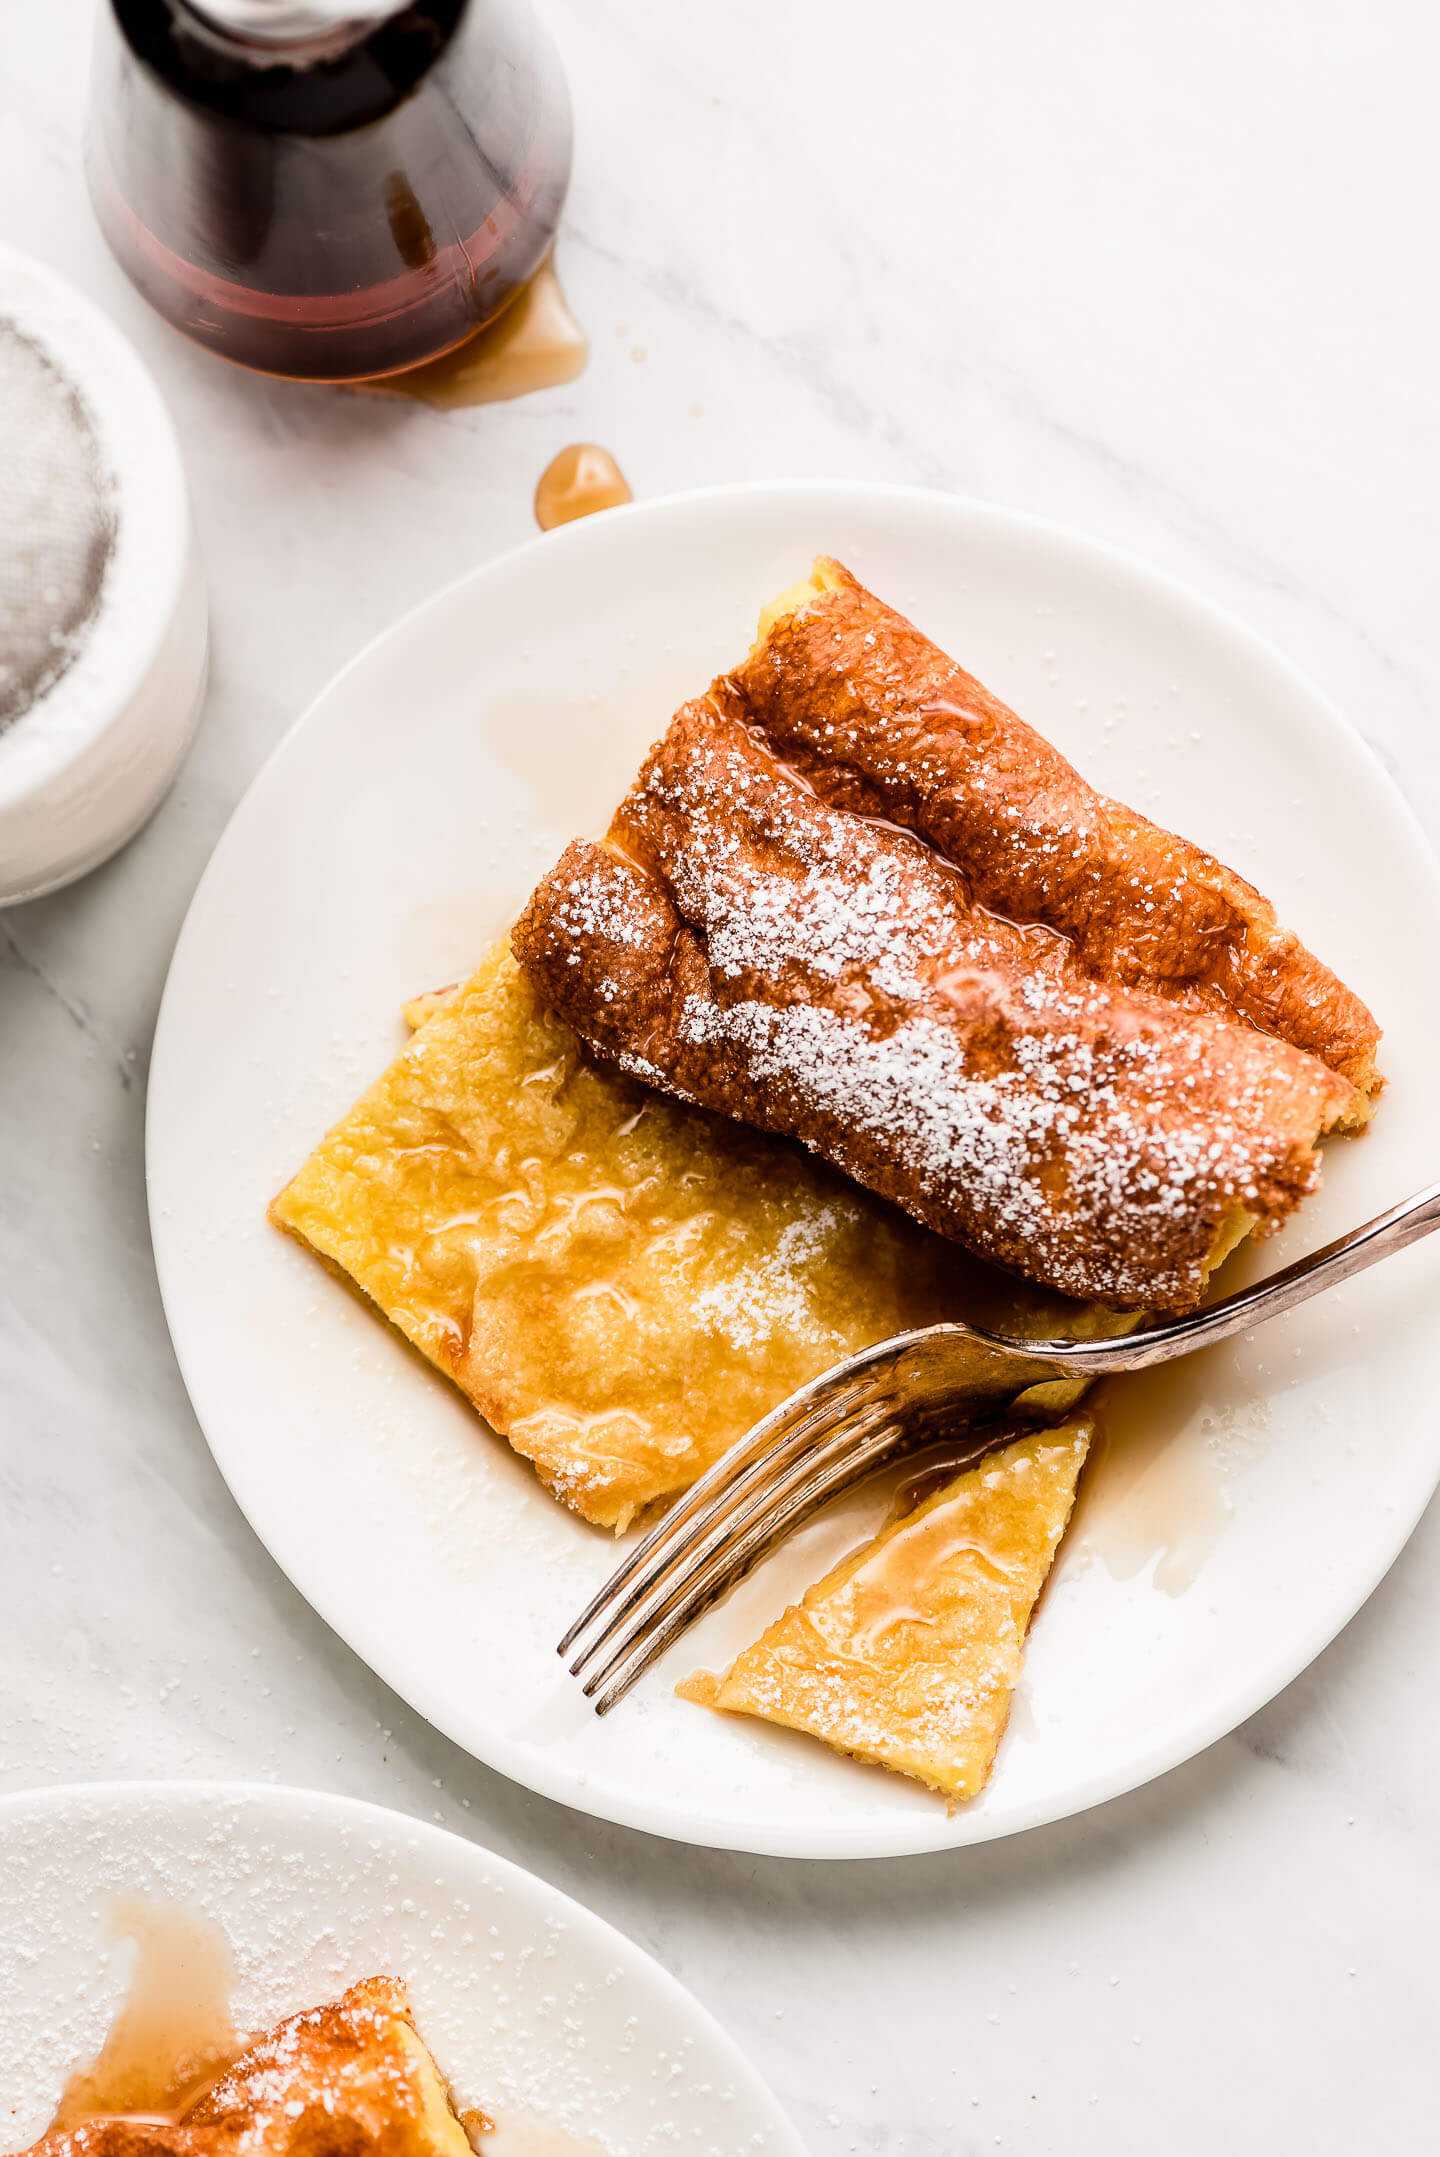 A fork cutting into in a piece of German Pancake covered in syrup and powdered sugar.